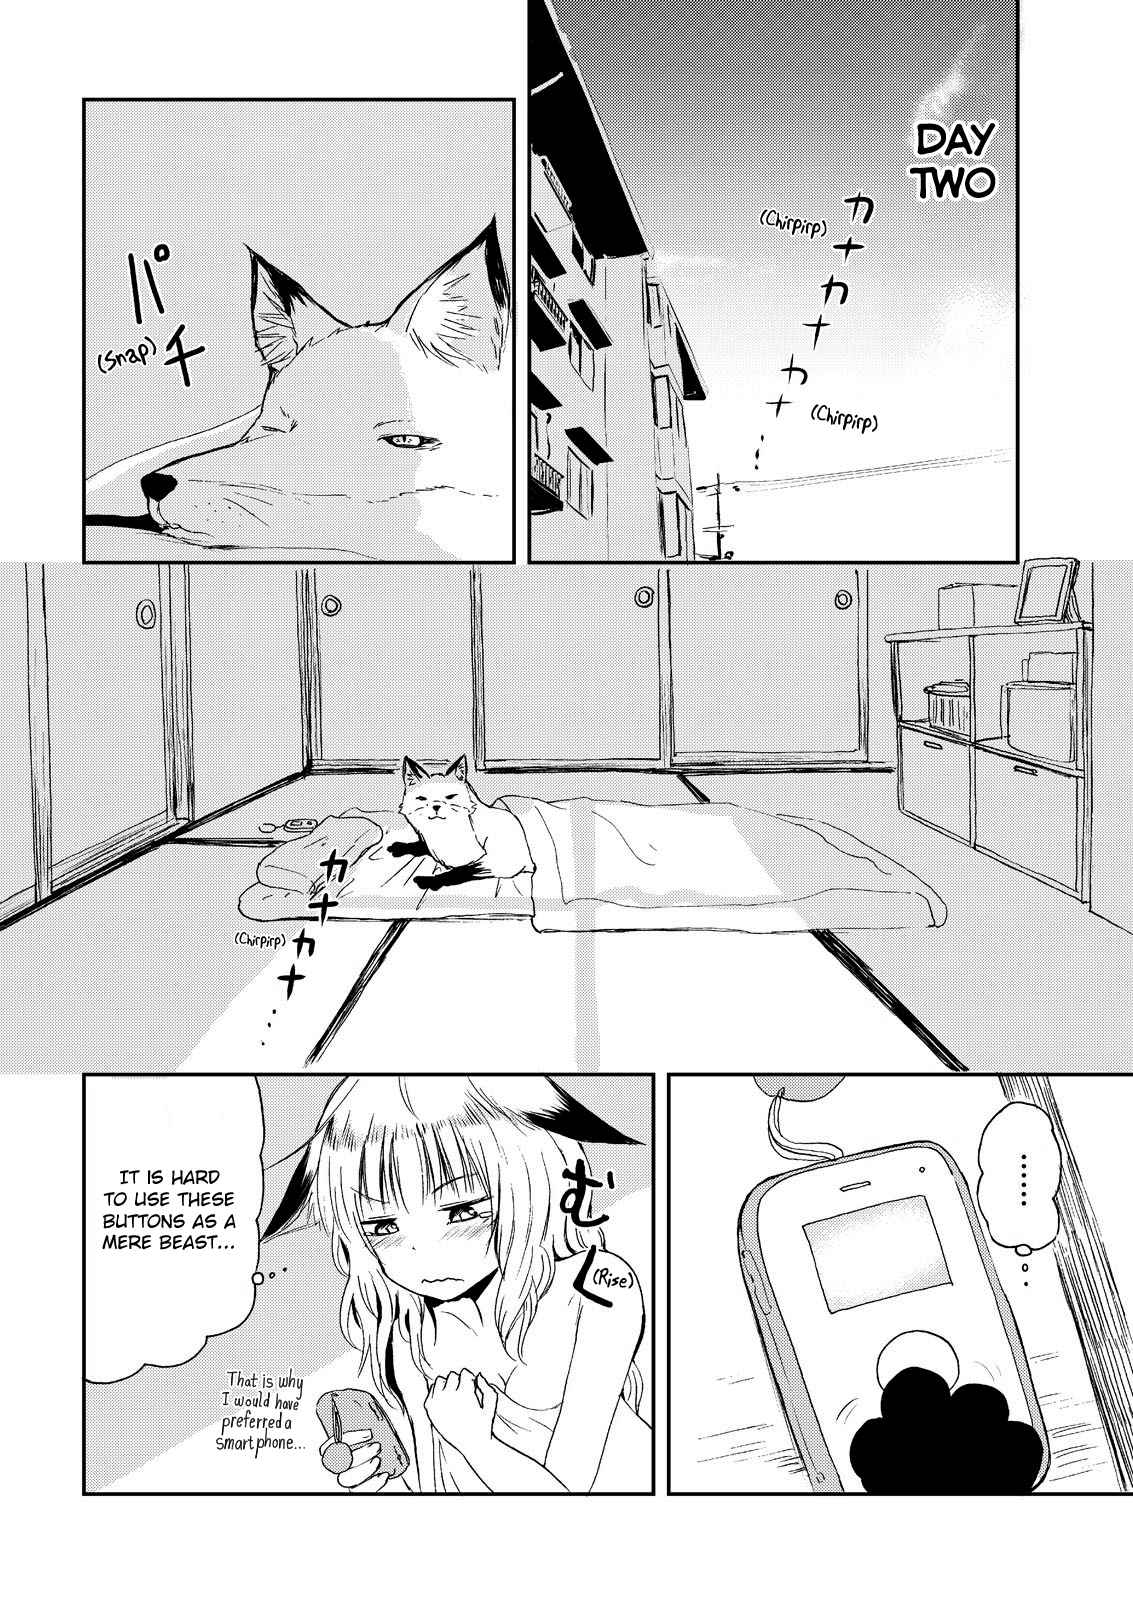 Kitsune no Oyome chan Vol. 1 Ch. 5 When I Left the House in my Kitsune Wife's Care